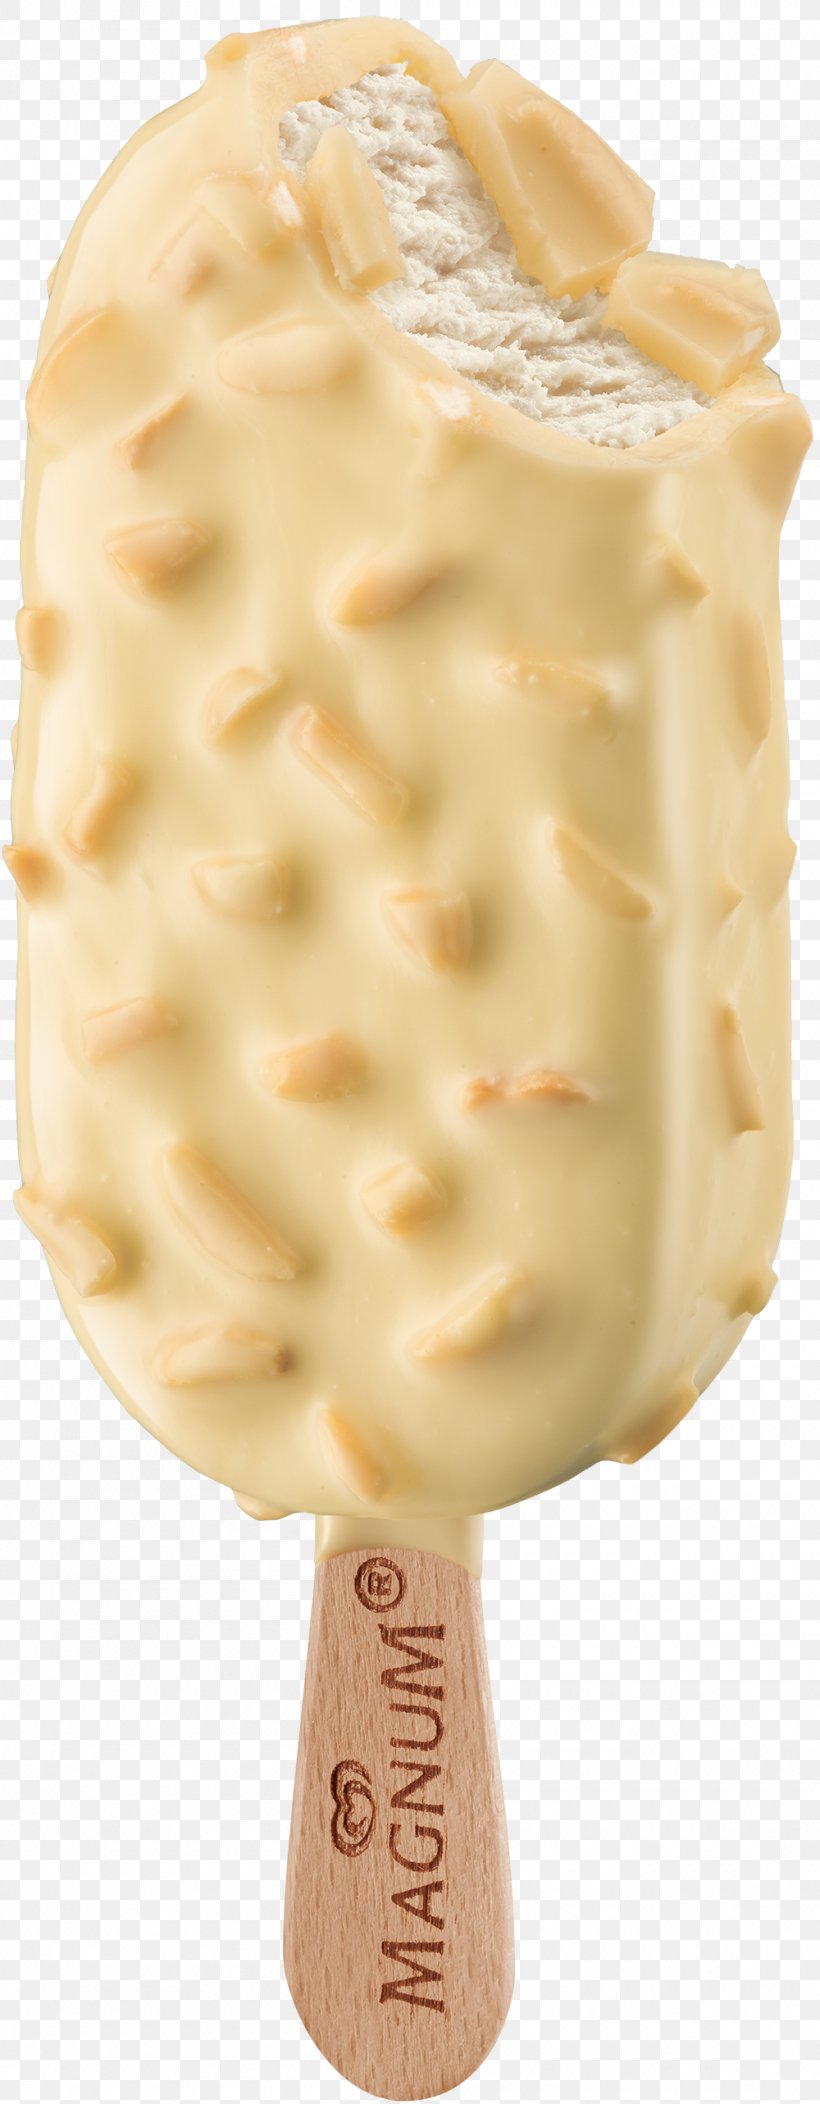 Ice Cream White Chocolate Magnum Wall's, PNG, 1000x2566px, Ice Cream, Almond, Chocolate, Chocolate Ice Cream, Dairy Product Download Free